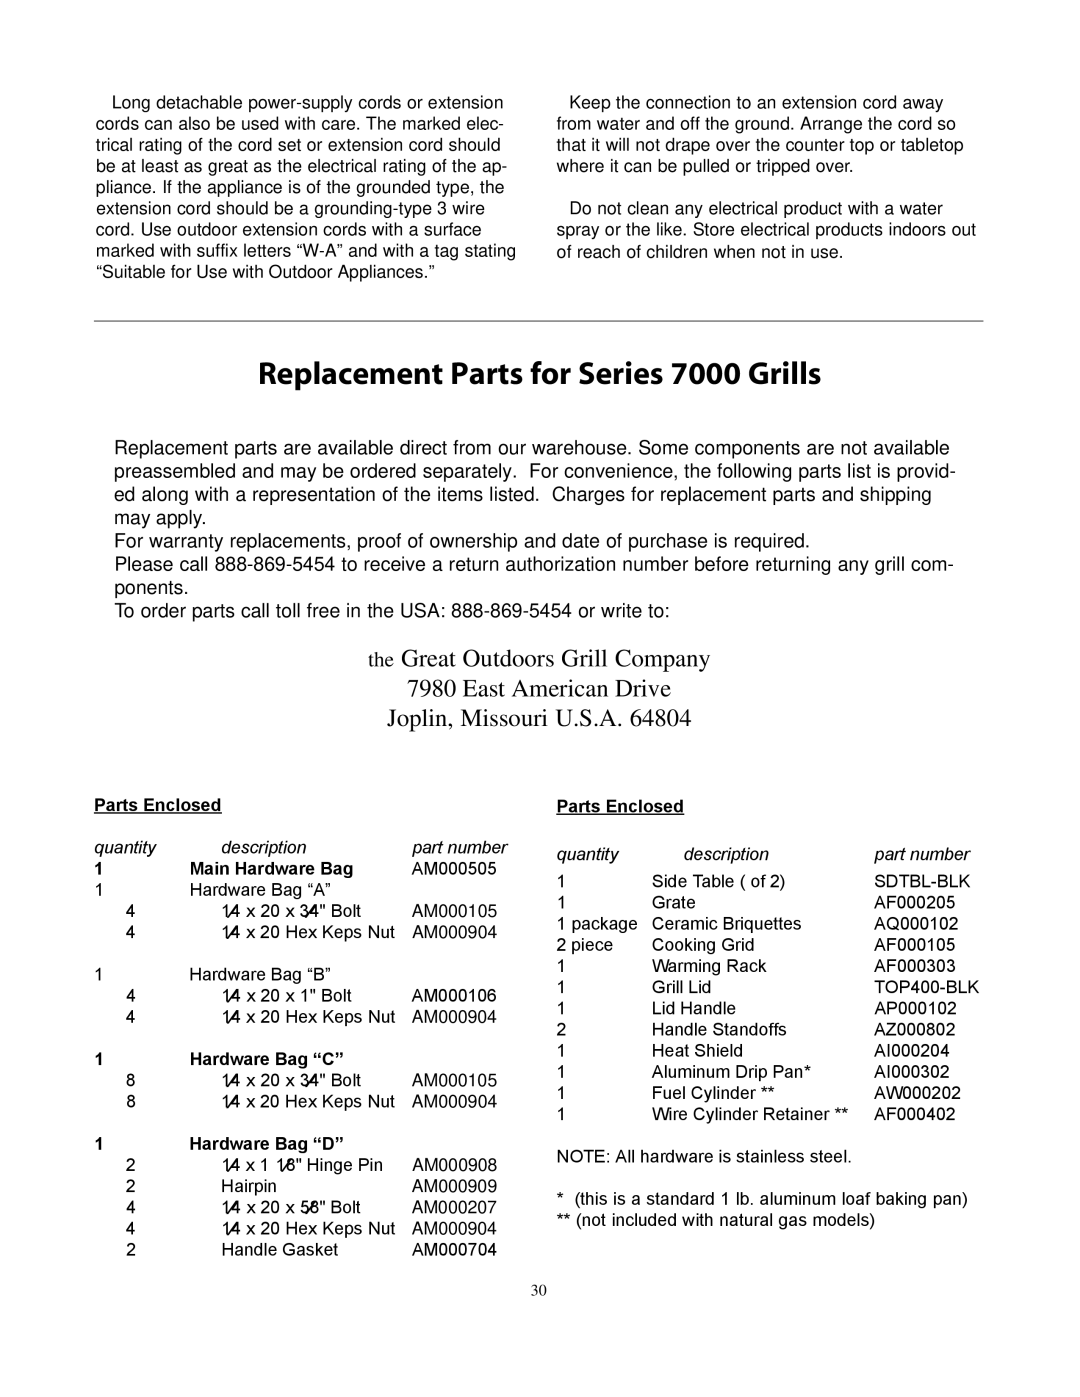 CFM Corporation owner manual Replacement Parts for Series 7000 Grills, Main Hardware Bag 